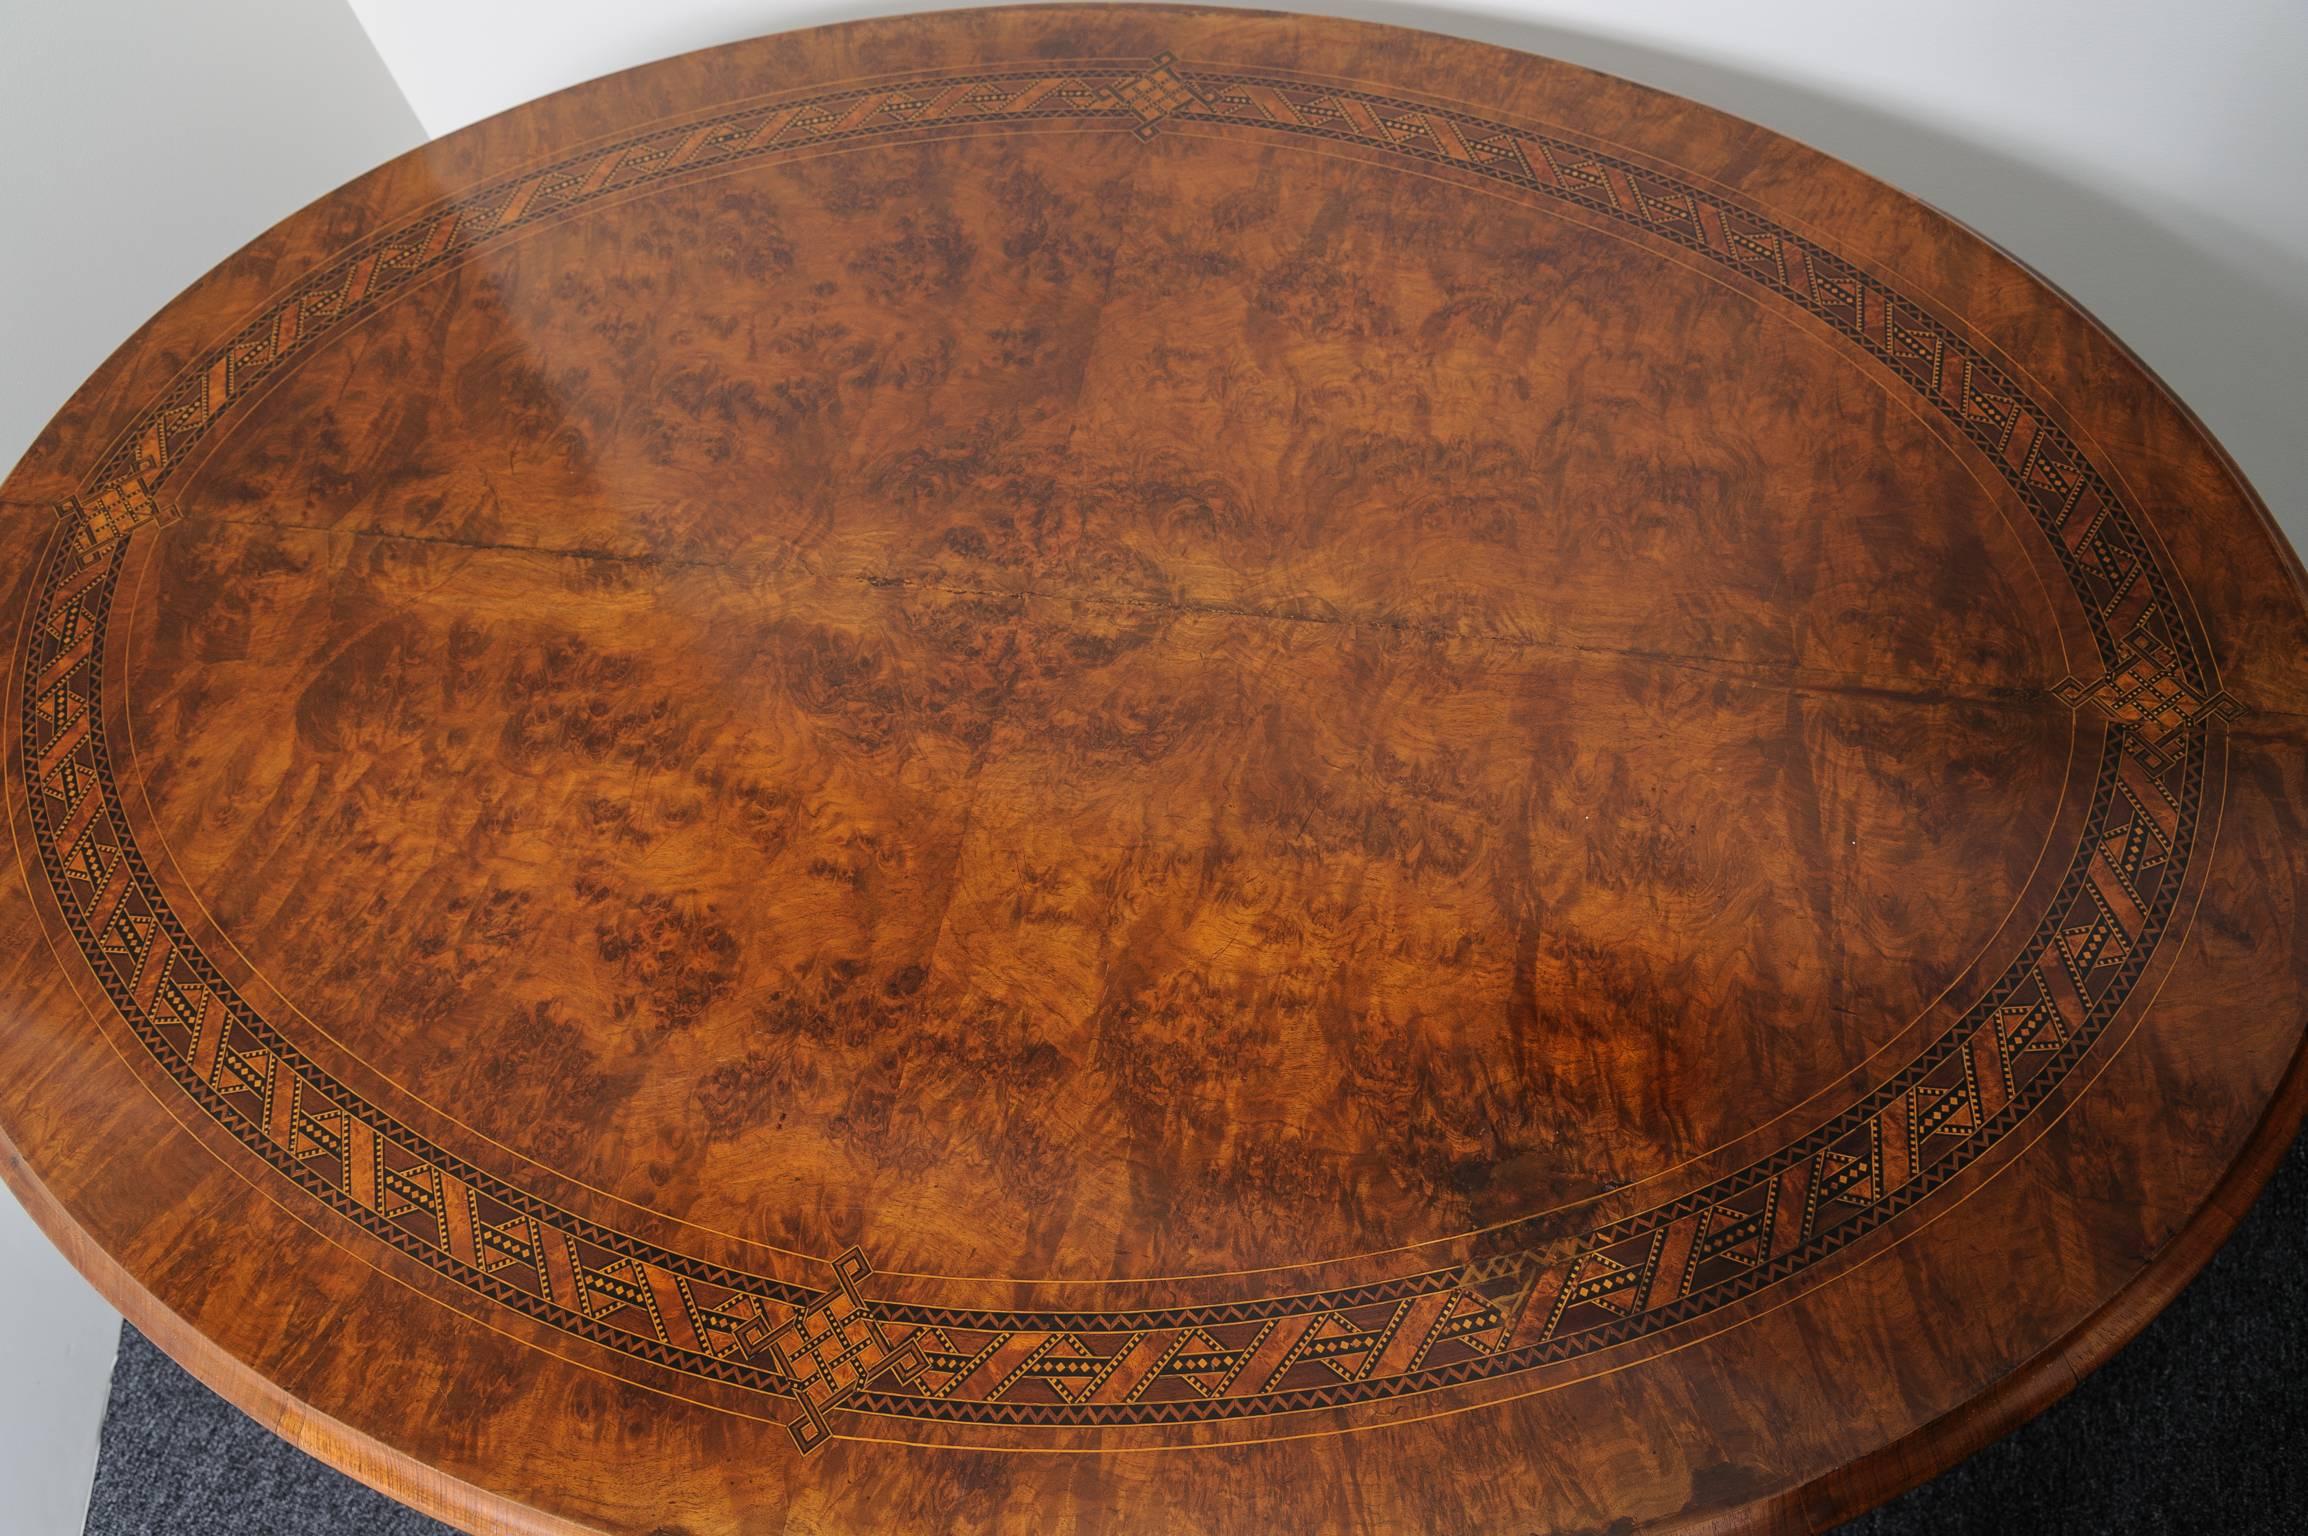 19th Century Edwardian Oval Center Table, Walnut and Burl Wood, Marquetry Inlay 2